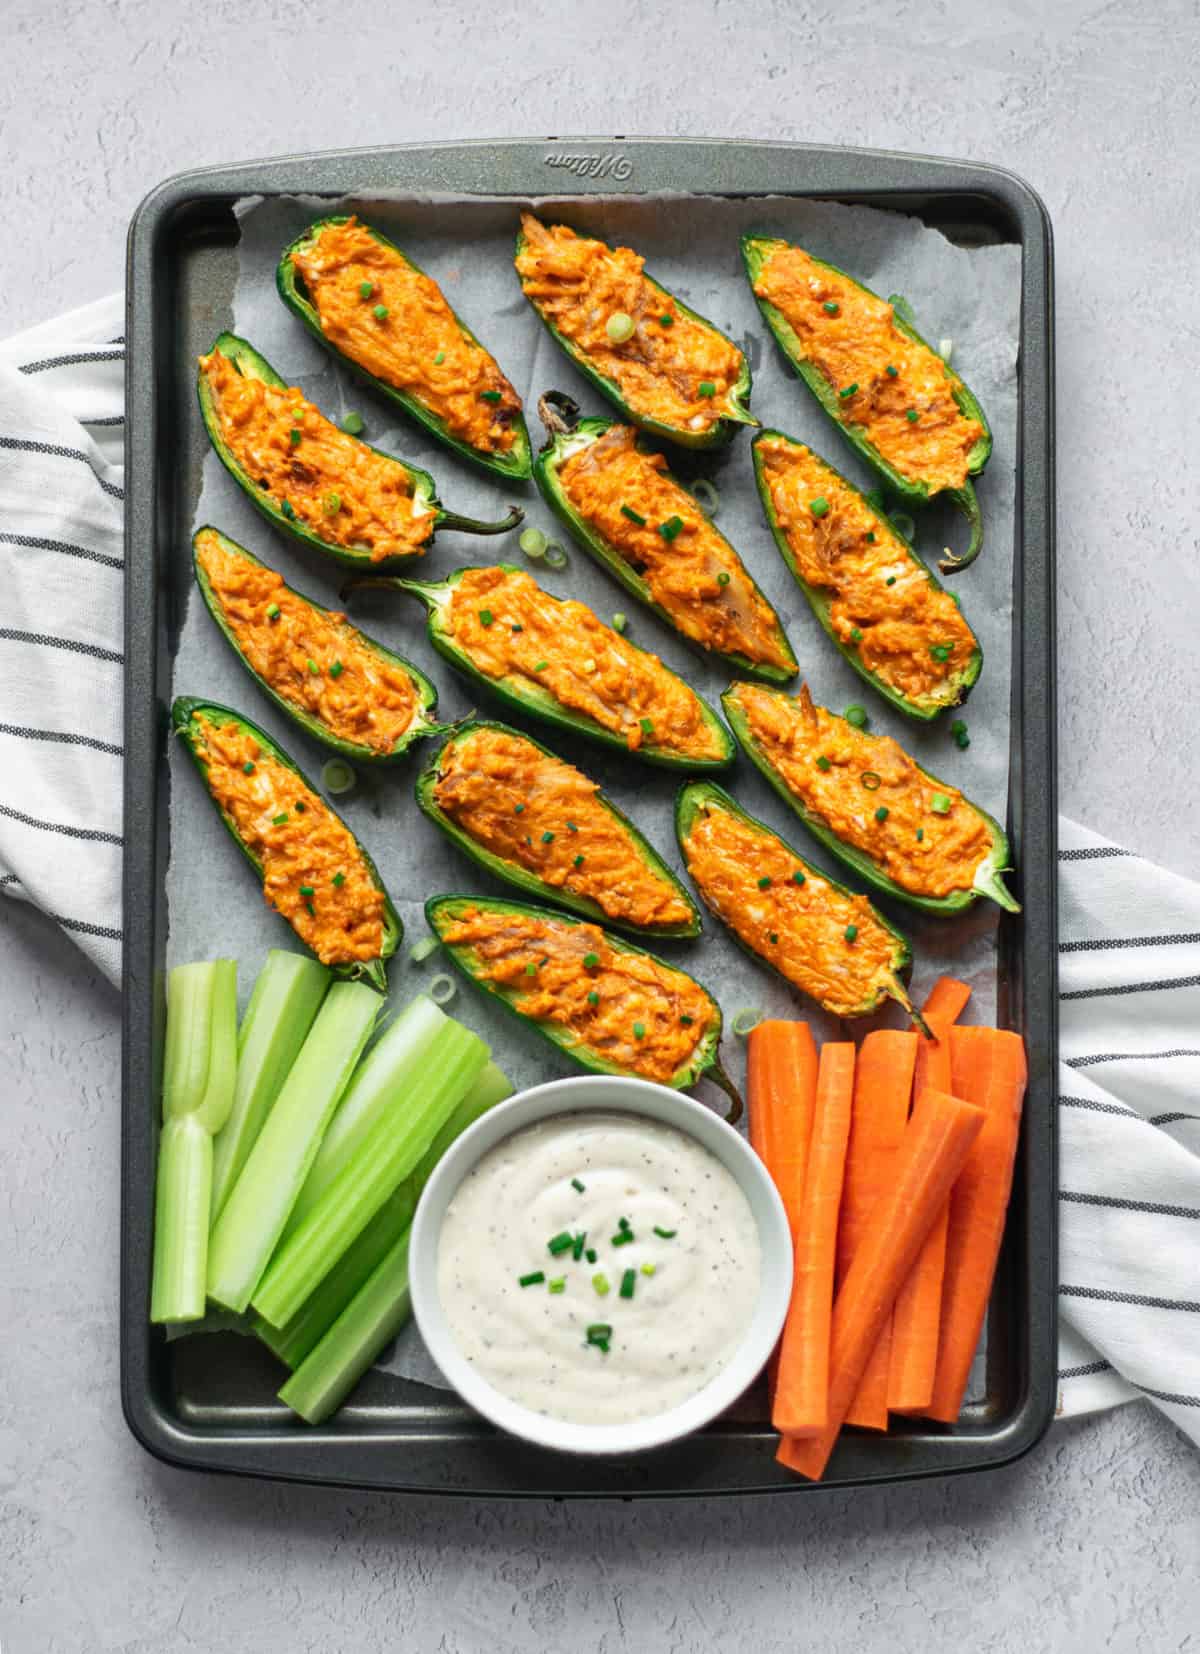 A tray of buffalo chicken jalapeno poppers, celery, and carrots